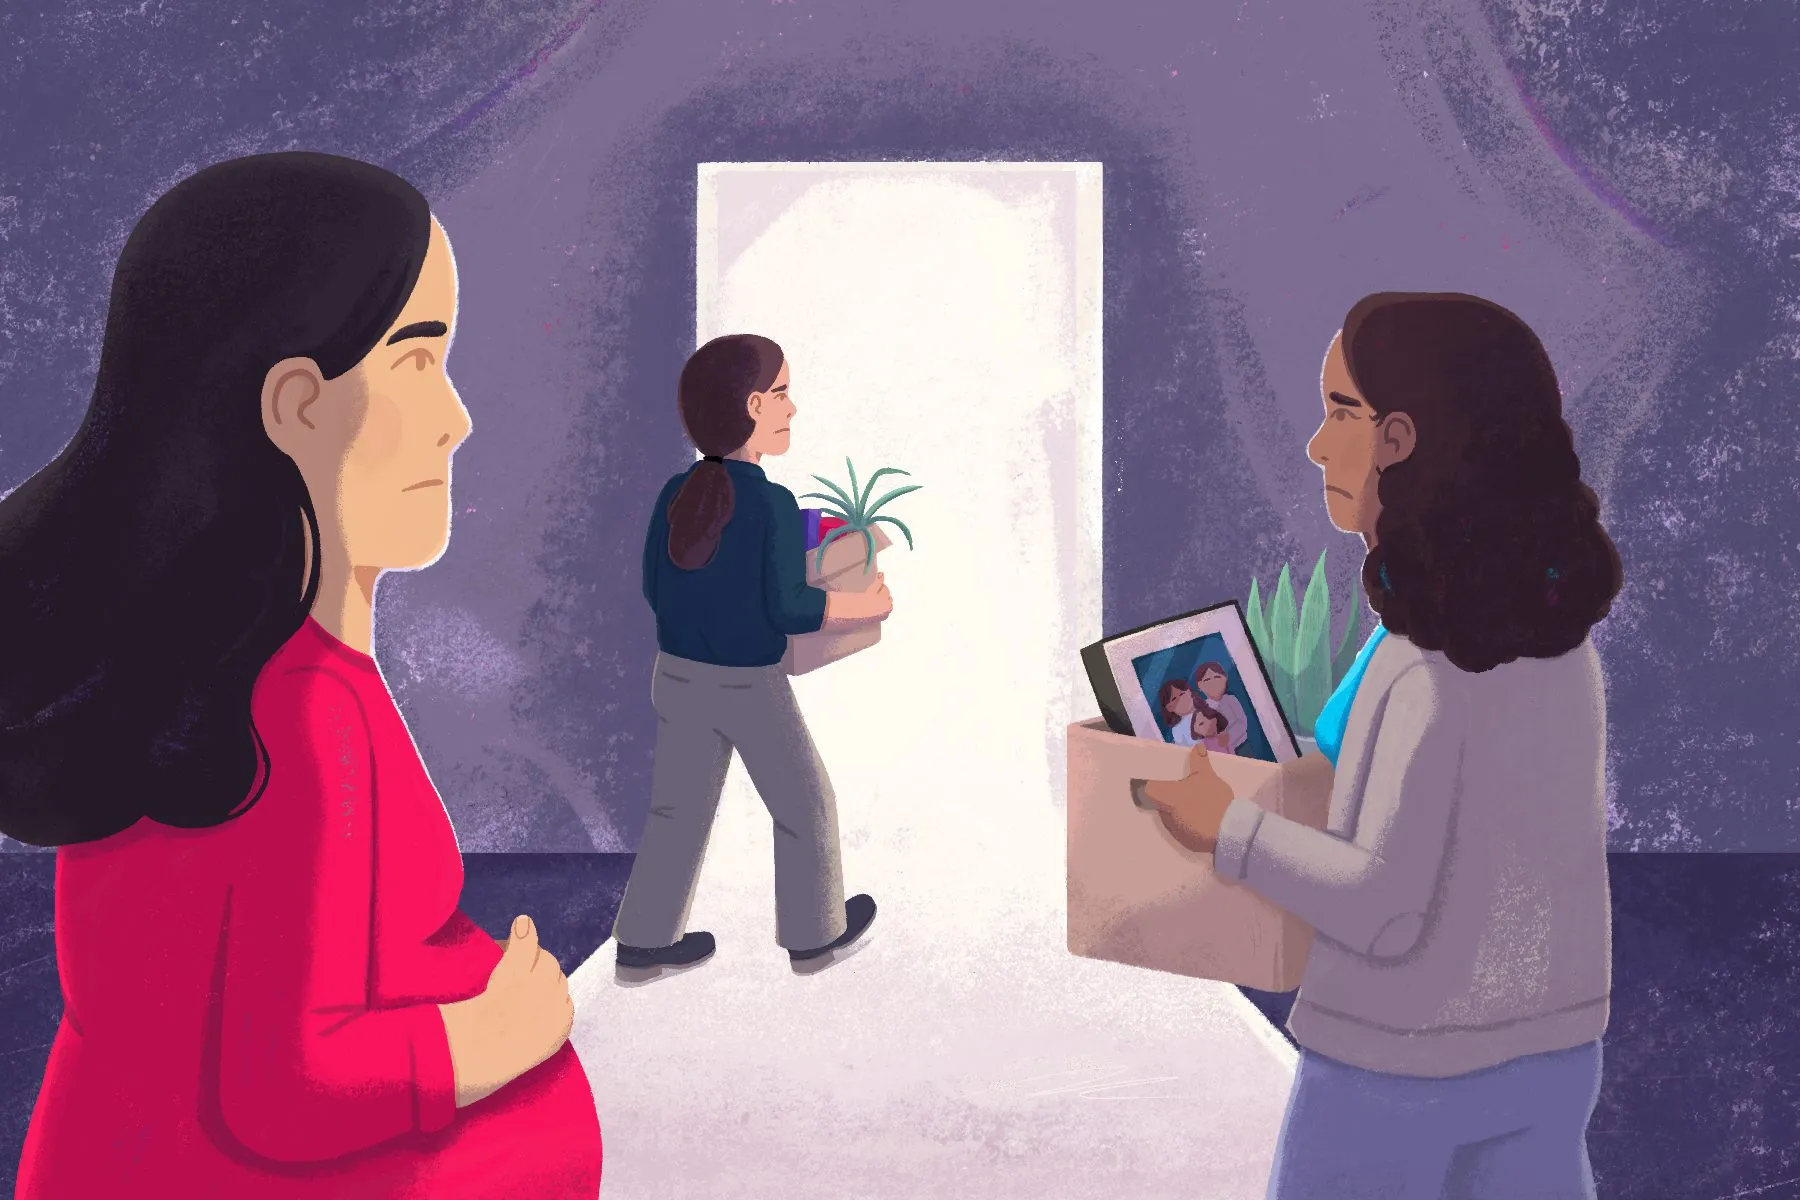 An illustration of women recently laid off from work (one of them is noticeably pregnant) headed out a doorway.